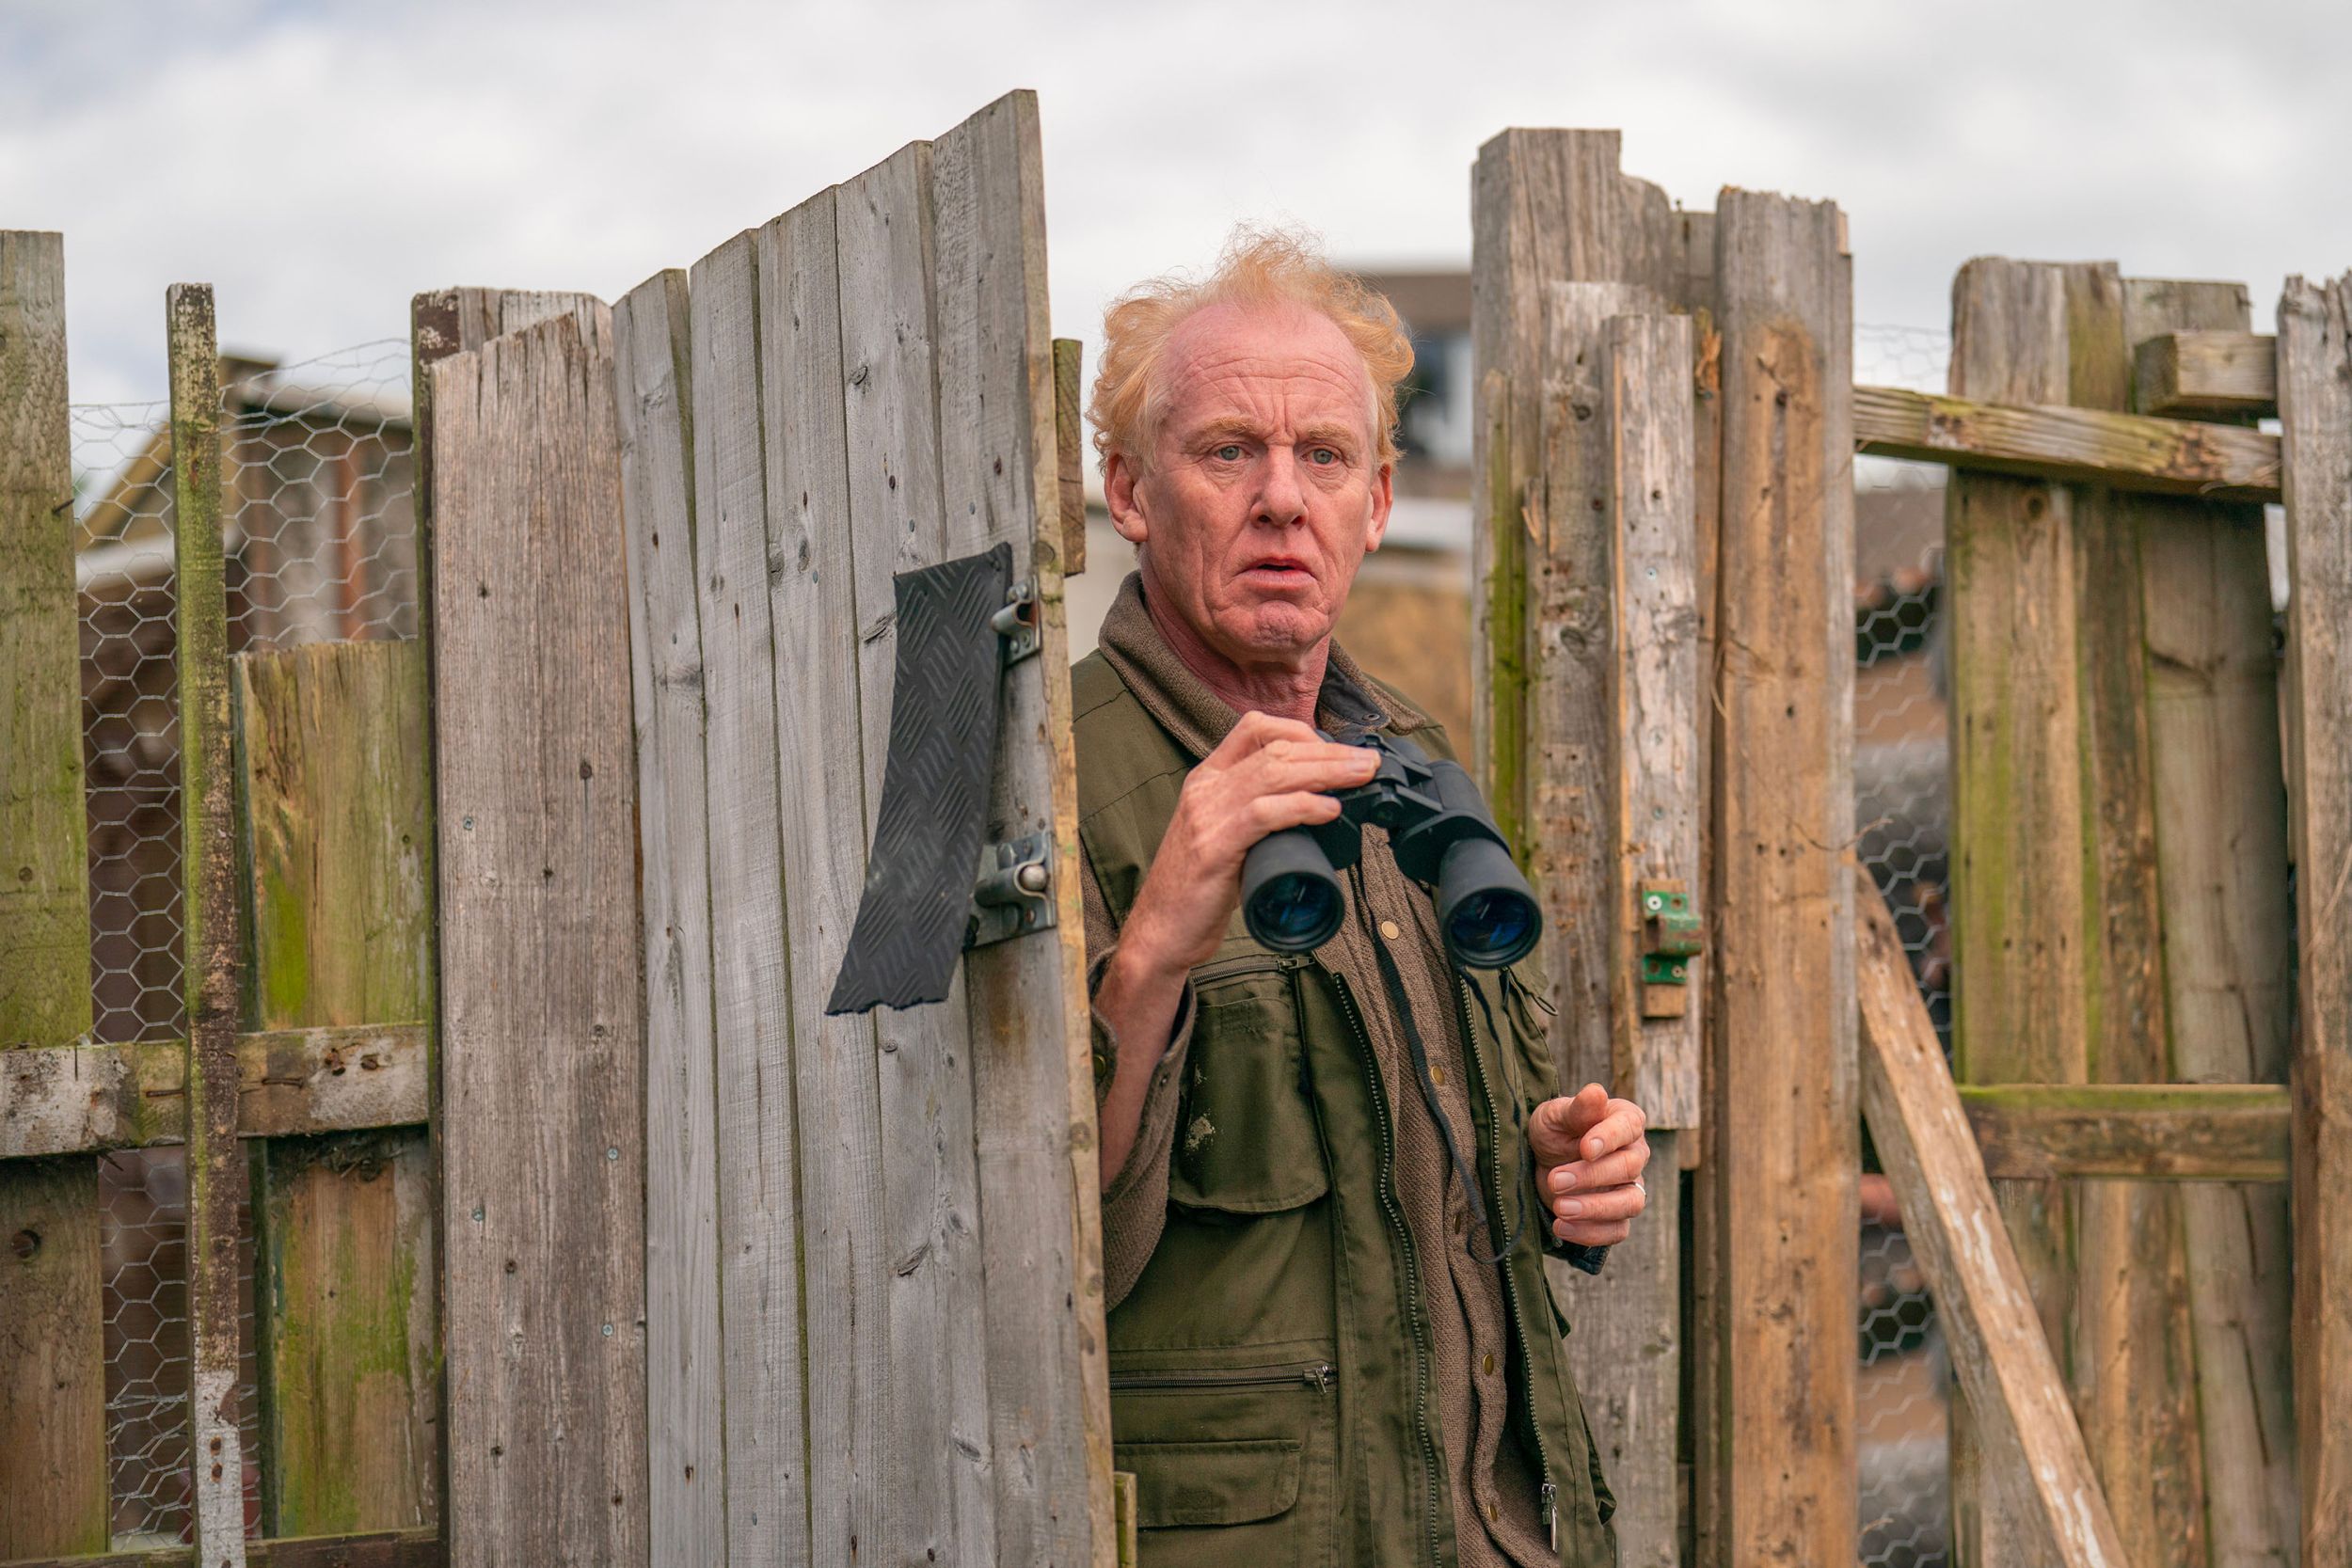 Steve Huison as Lomper exiting out his back gate with binoculars in The Full Monty 